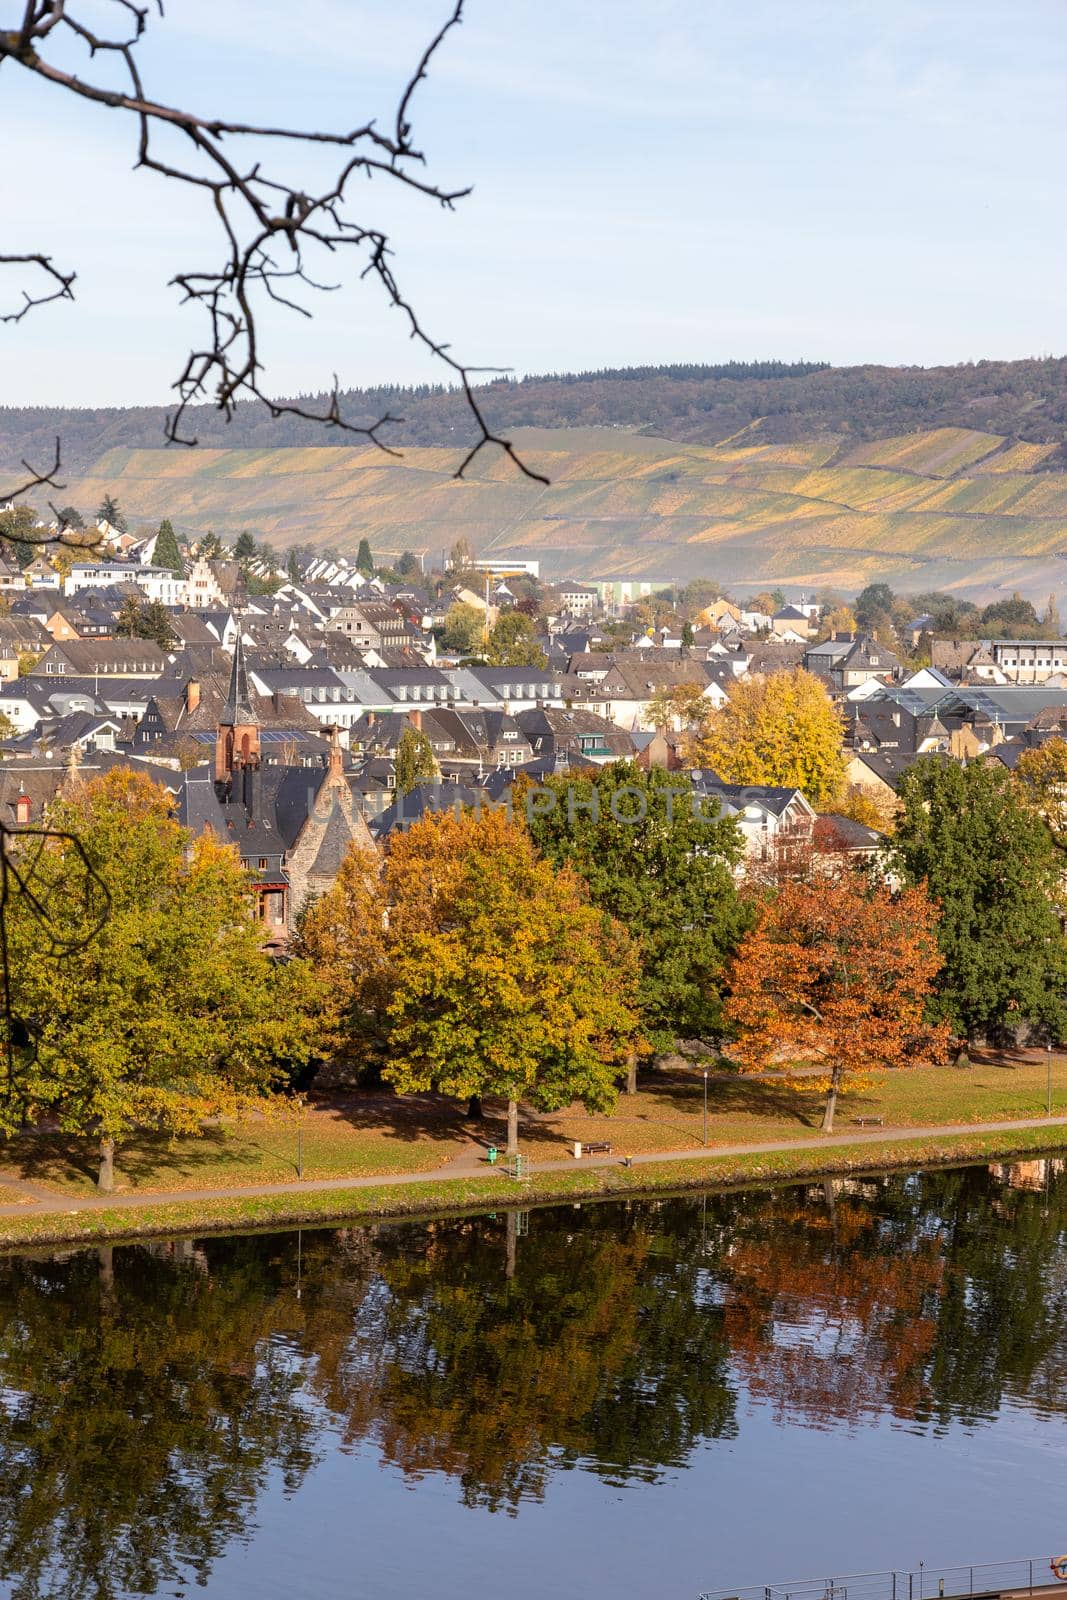 Bernkastel-Kues and the river Moselle in autumn with multi colored trees by reinerc